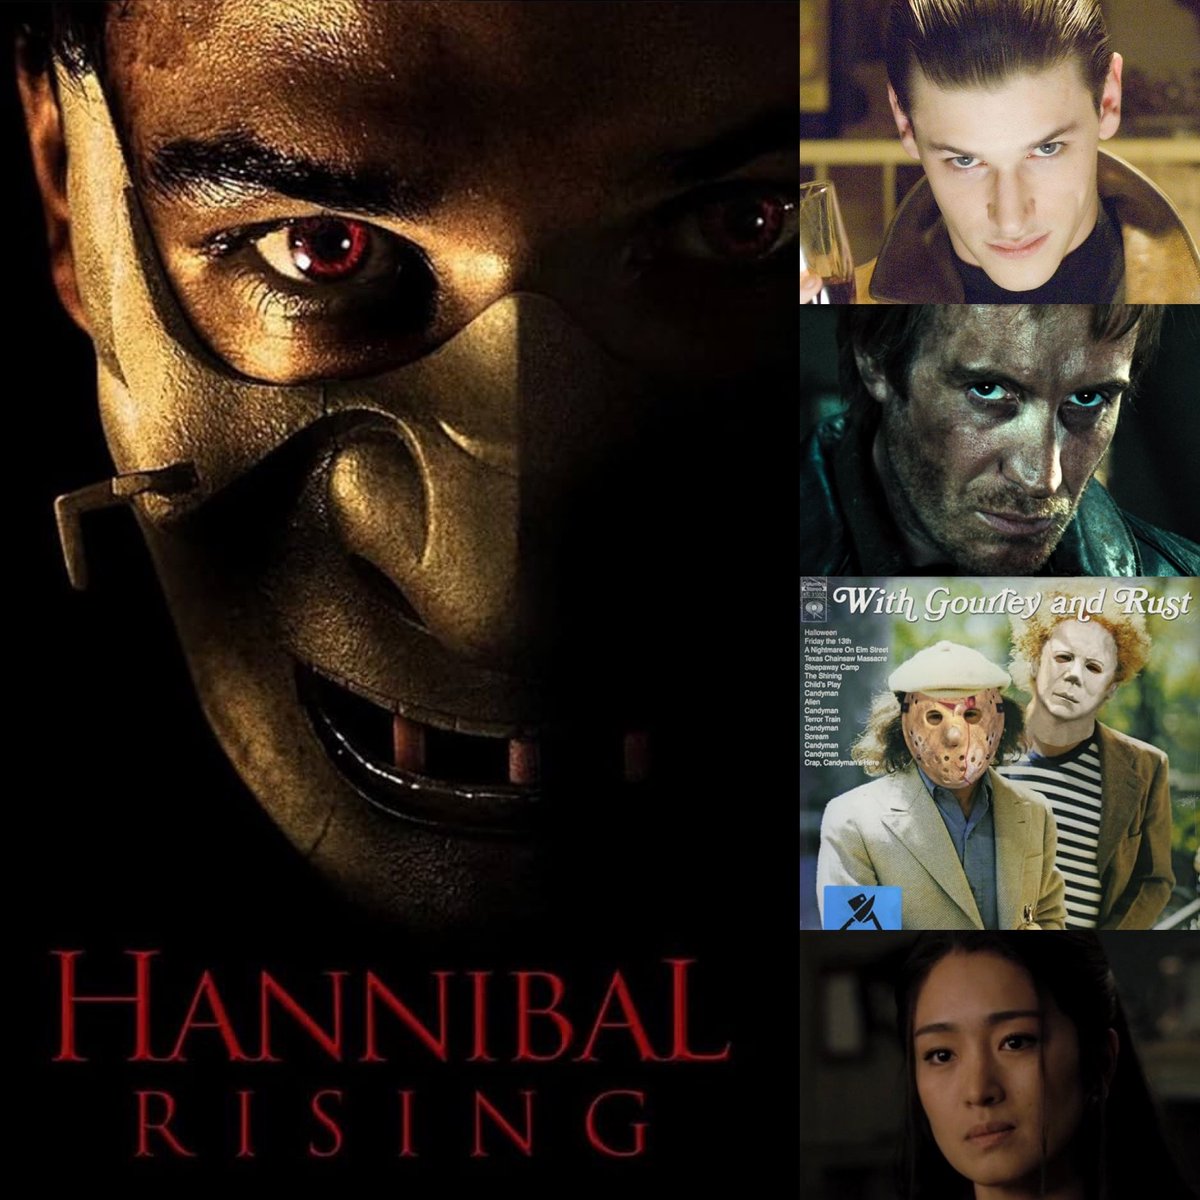 You’ve heard of BREAD RISING but have you heard the tale of… “HANNIBAL RISING”?!!! AVAIL TODAY on the “With @gourleyandrust” podcast, @MattGourley and I finish our 5-film Hannibal Lecter series with THE BEST ONE*** yet! Listen now patreon.com/withgourleyand… ***the worst one yet